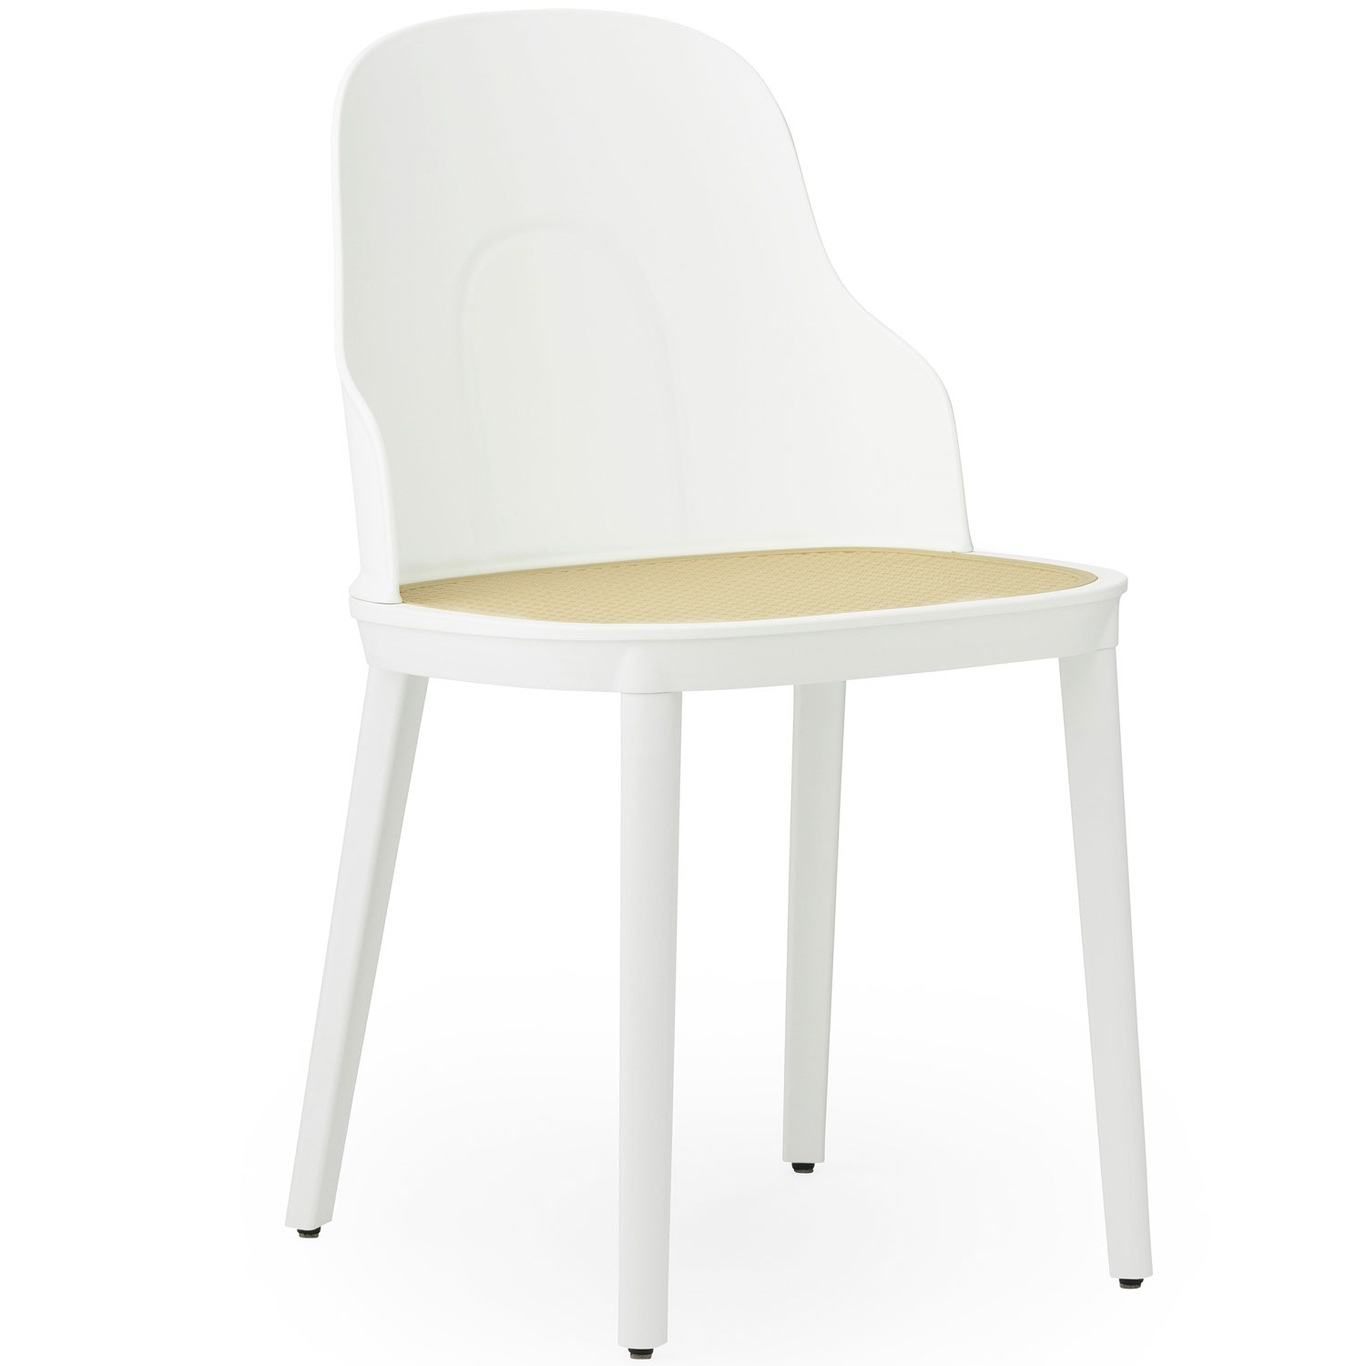 Allez Chair With Moulded Weave, White